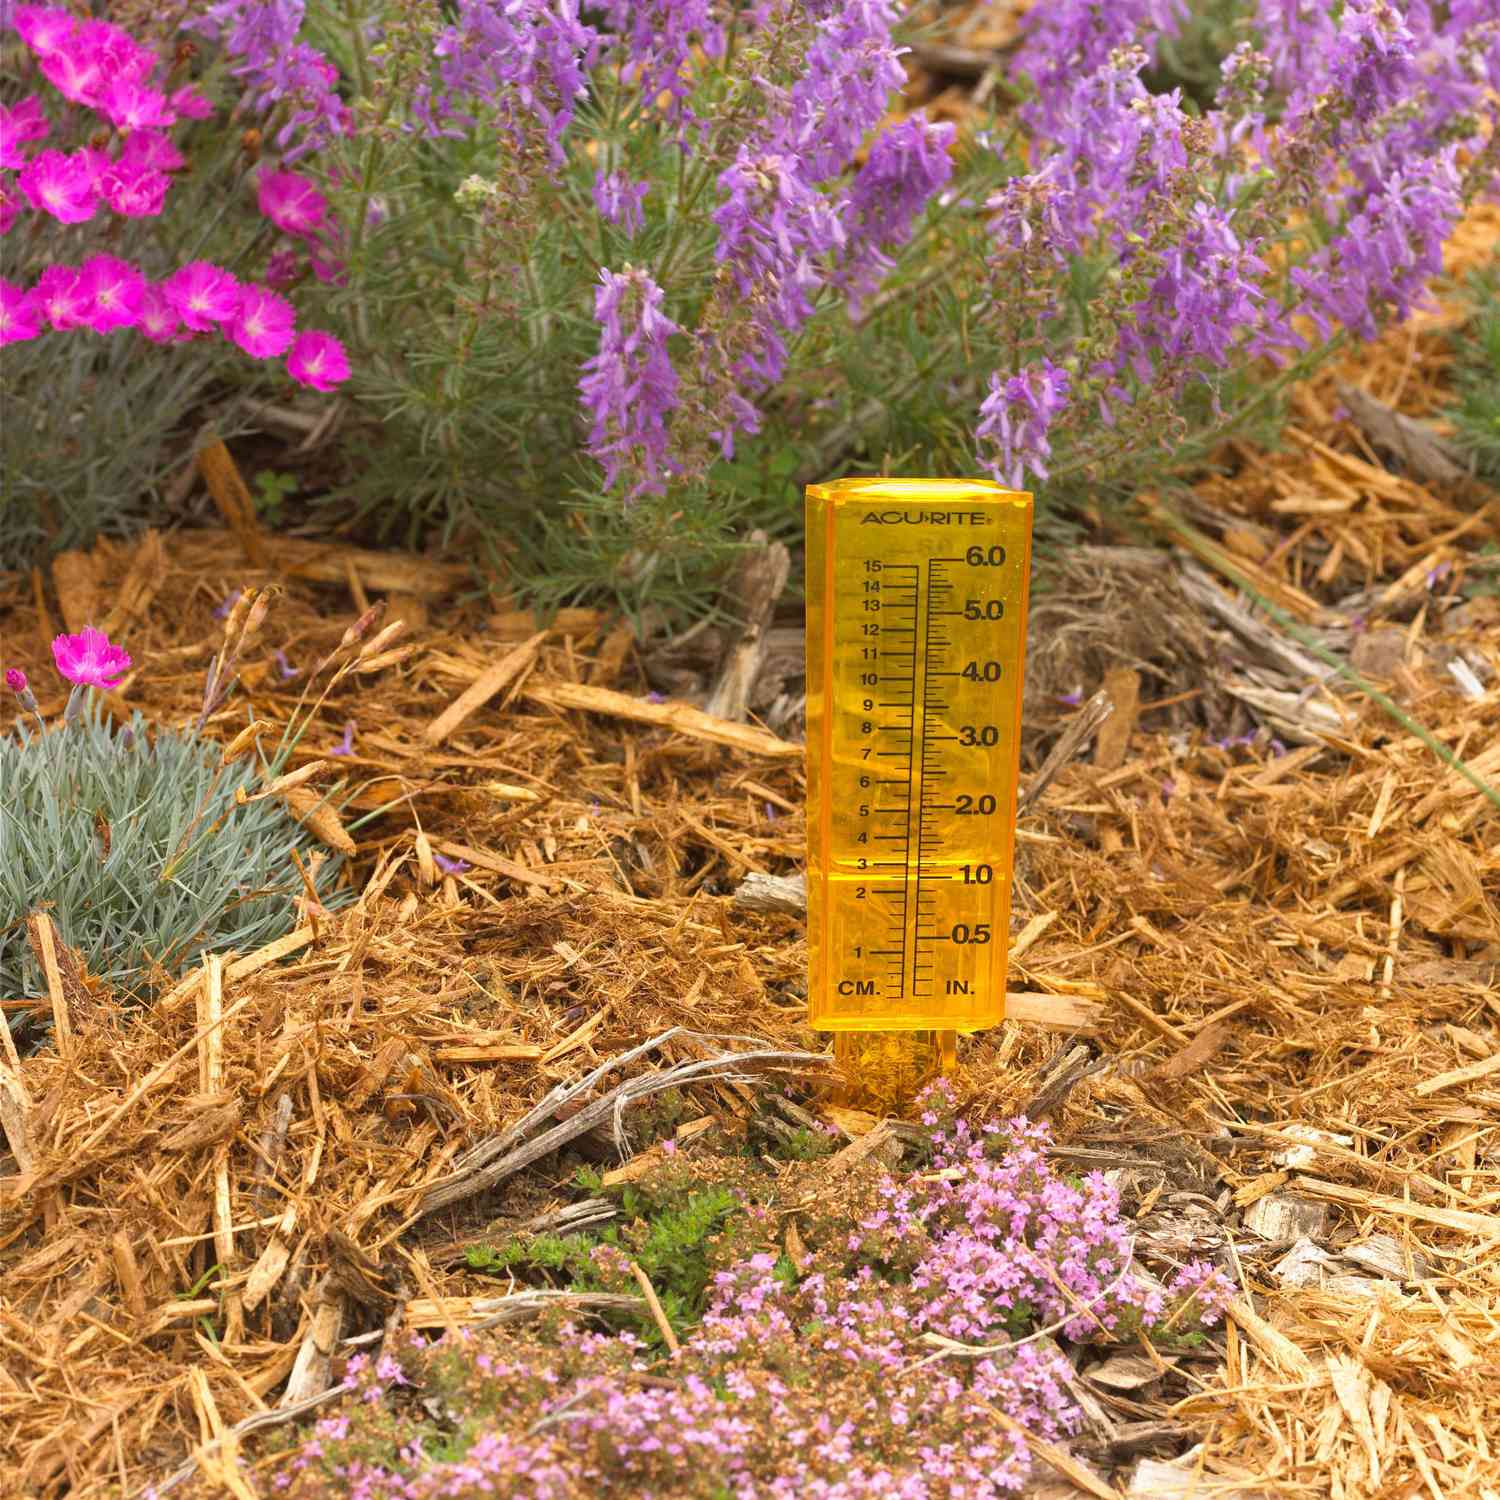 Ways to save water in your garden: Use a gauge